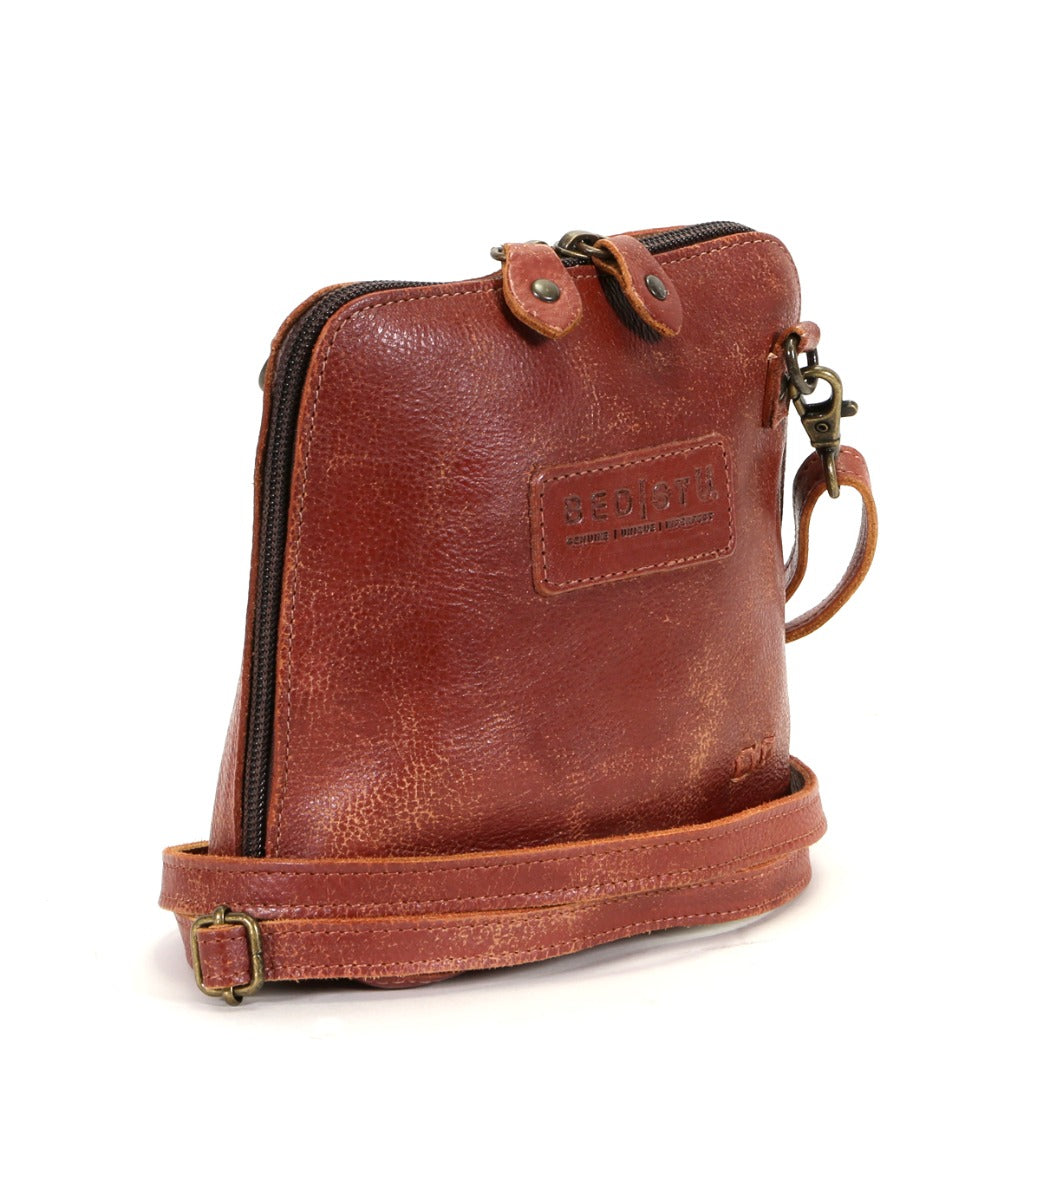 A Ventura brown leather cross body bag with a strap by Bed Stu.